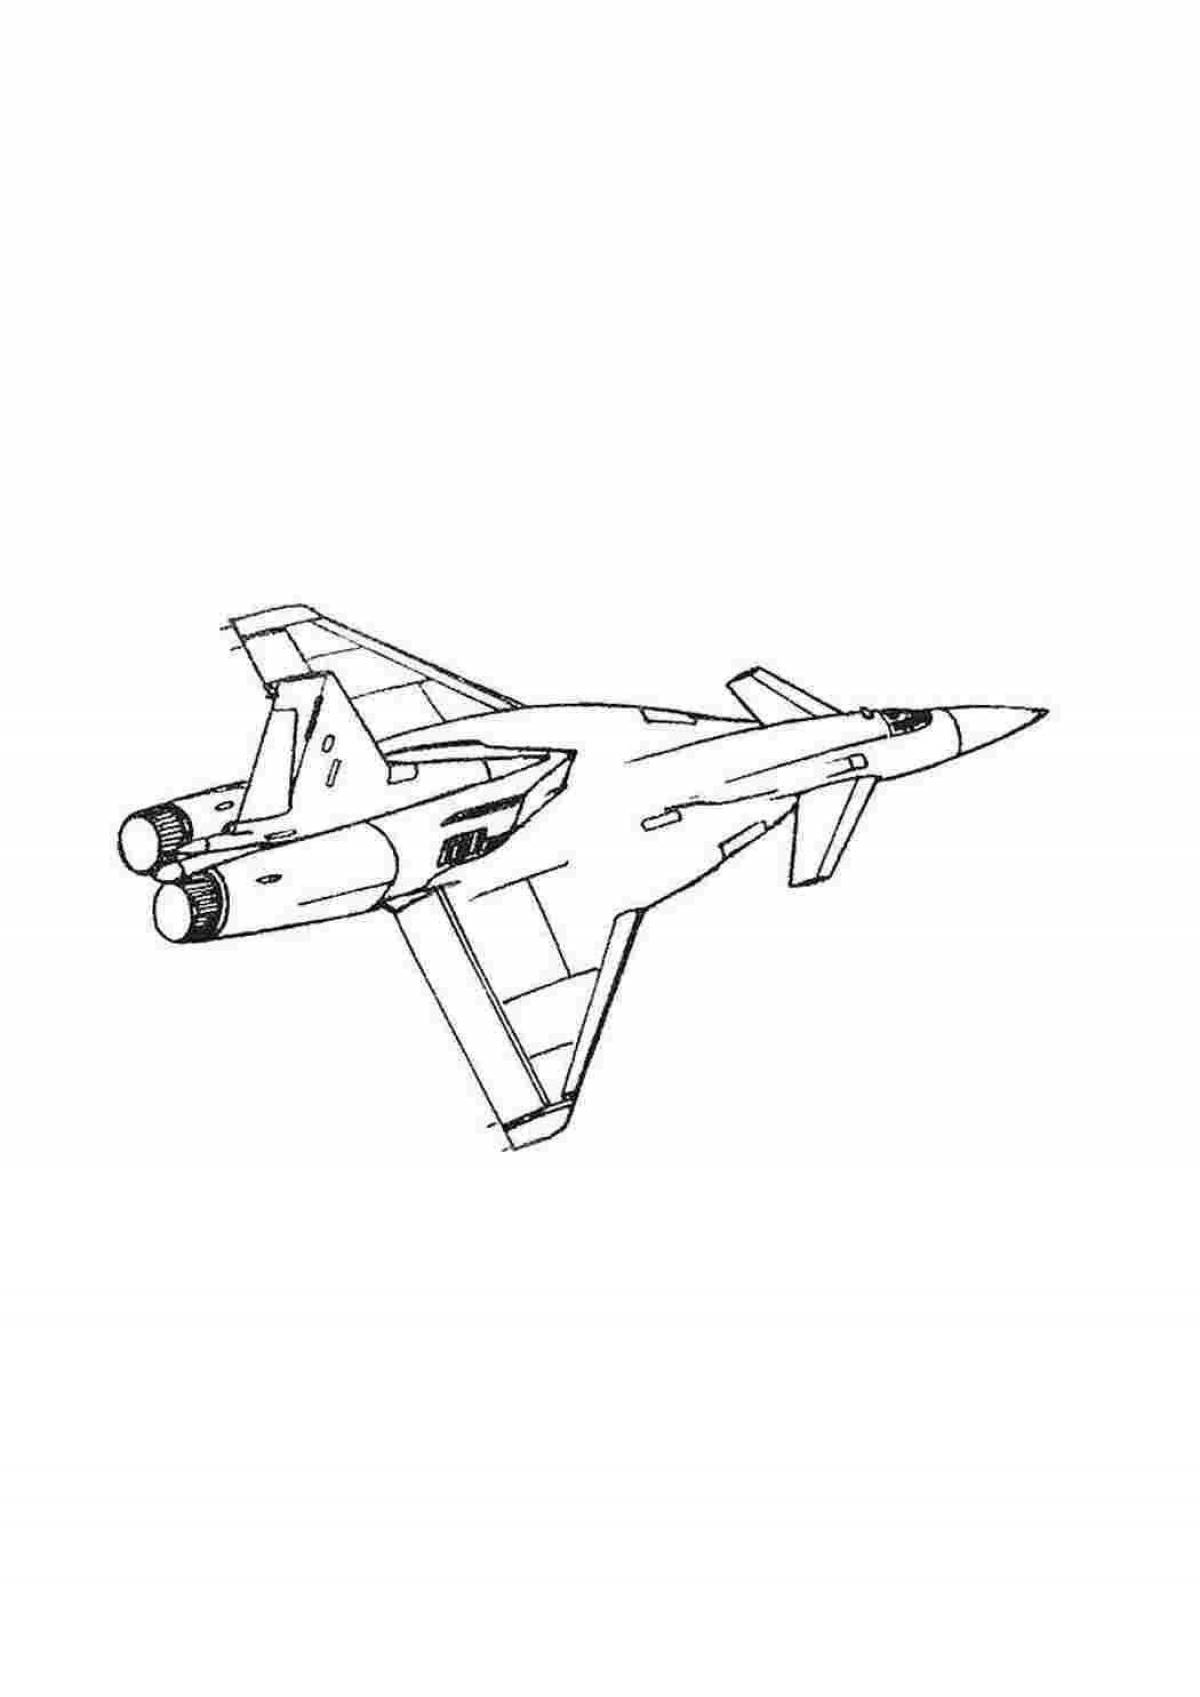 Superb fighter coloring book for 5-6 year olds